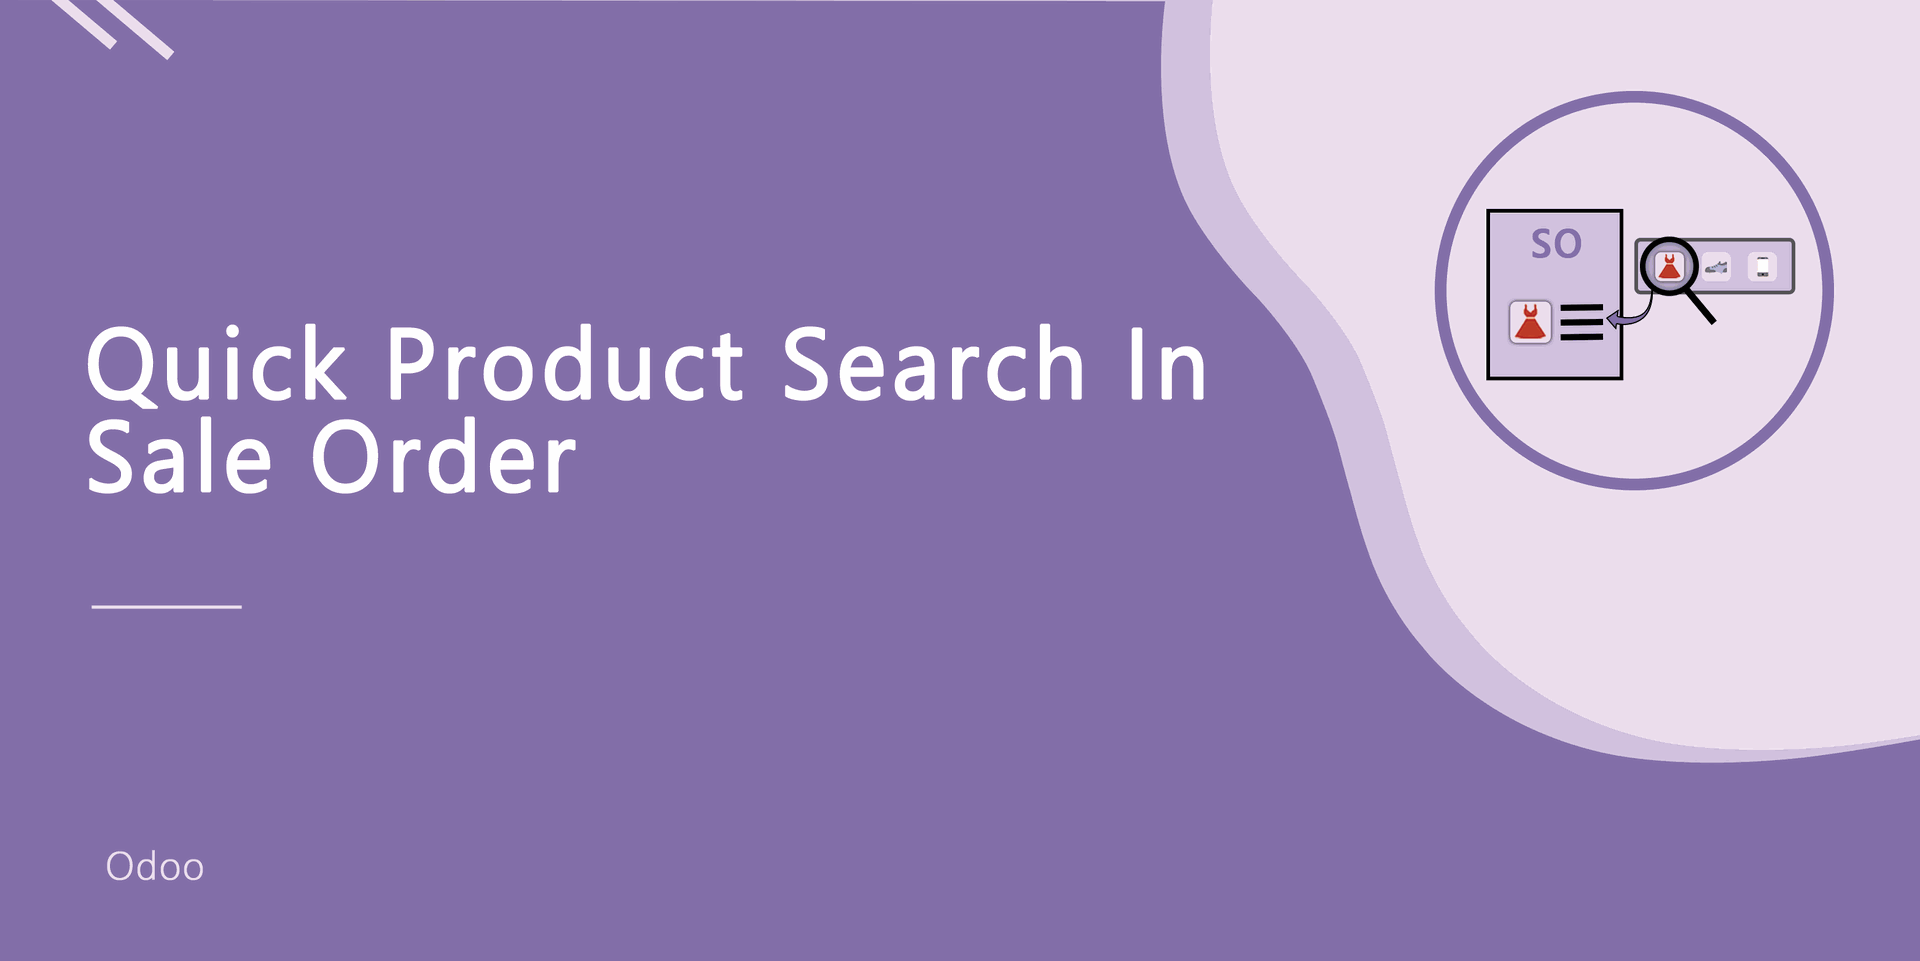 Quick Product Search in Sale Order